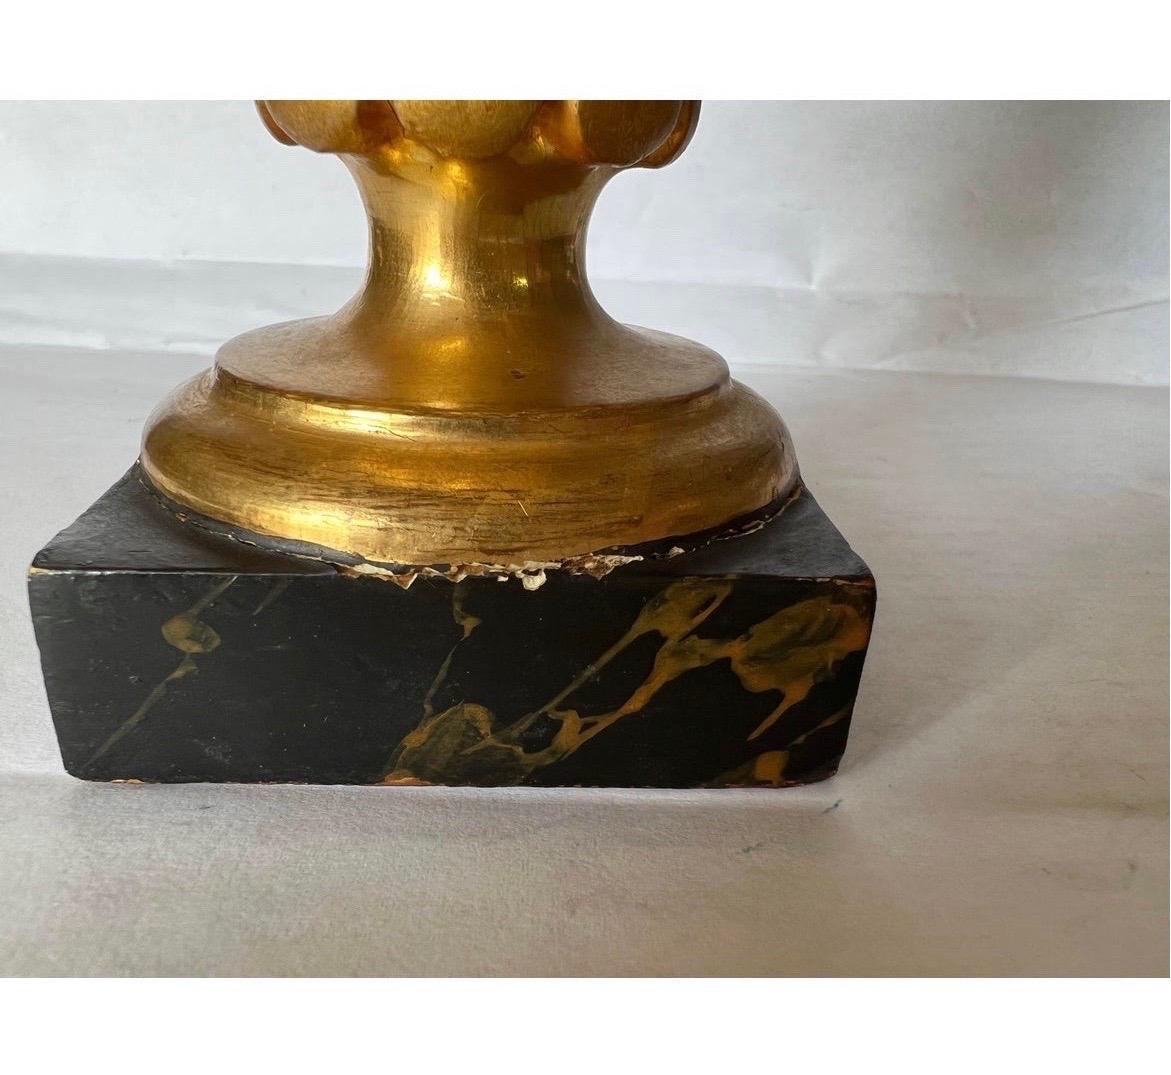 Pair Italian Neoclassical Carved Gilt Wood Ornamental Urns on Faux Marble Bases For Sale 3